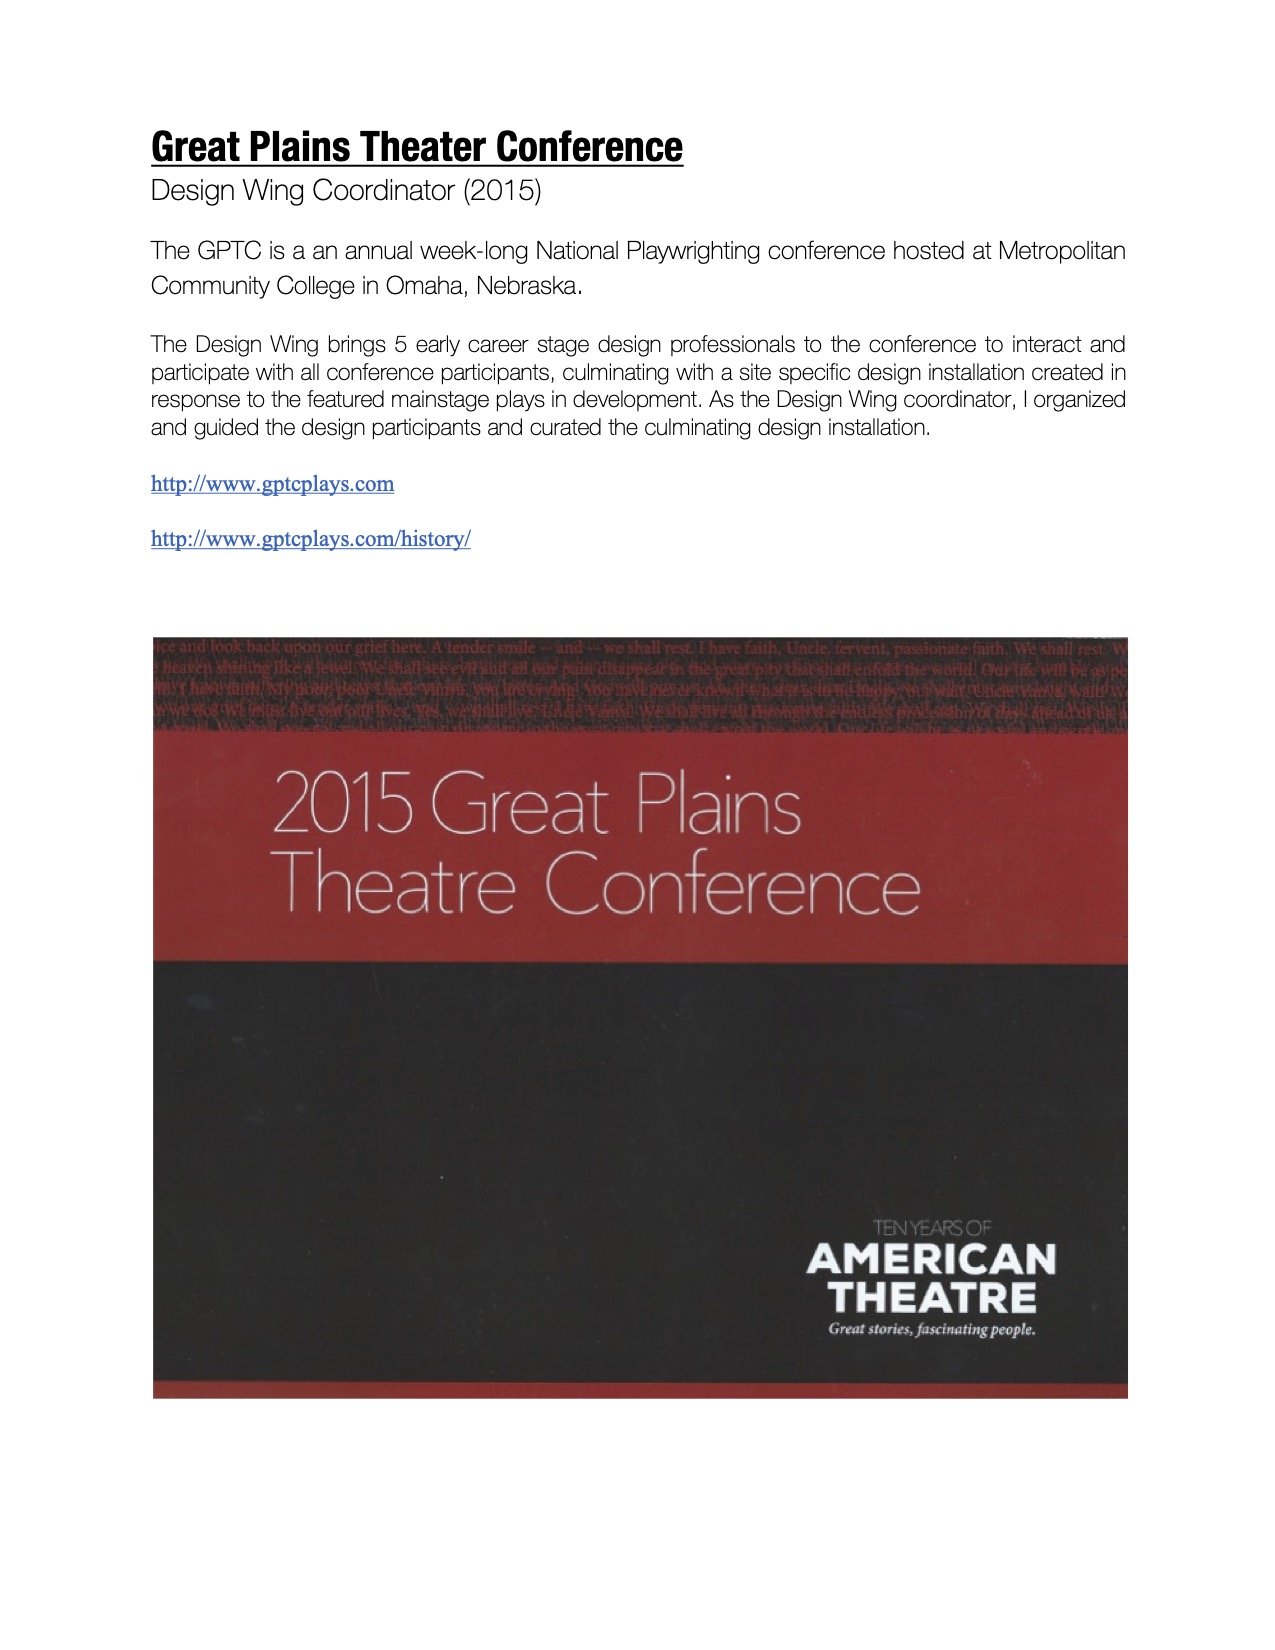 6-Great Plains Theater Conference_1.jpg